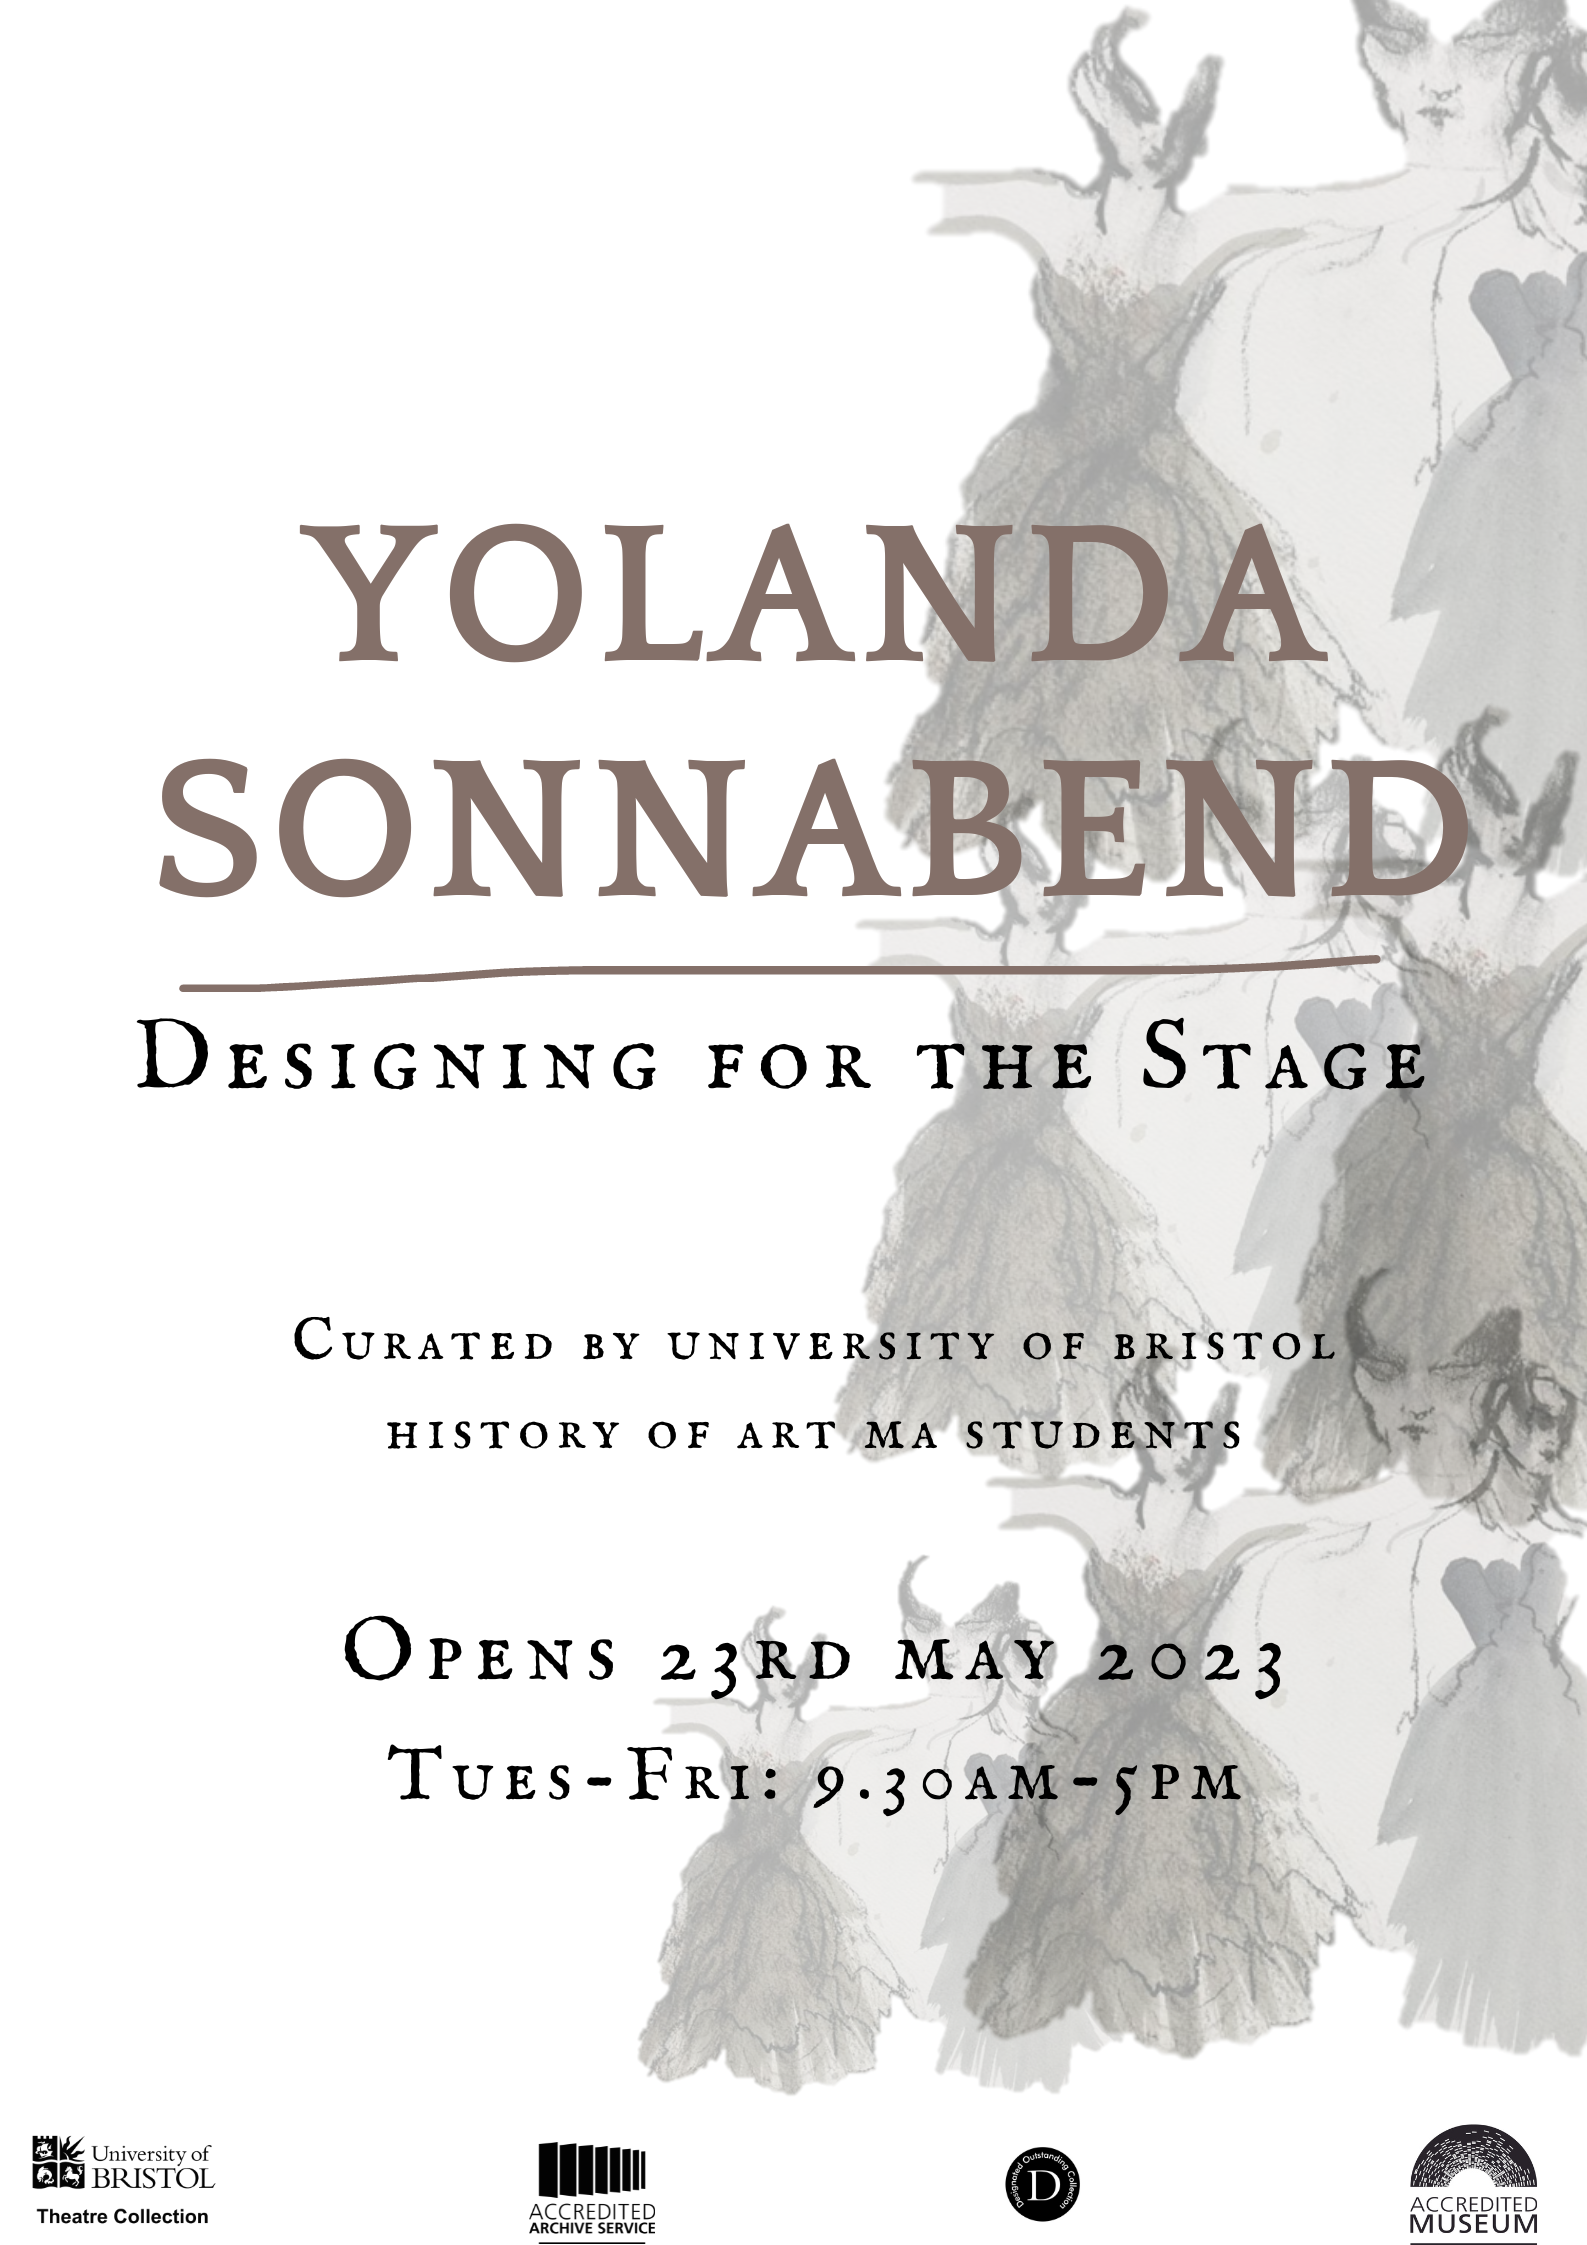 Yolanda Sonnabend designing for the stage curated by University of Bristol History of Art MA students opens 23rd May 2023 Tuesday to Friday 9:30 am to 5 pm